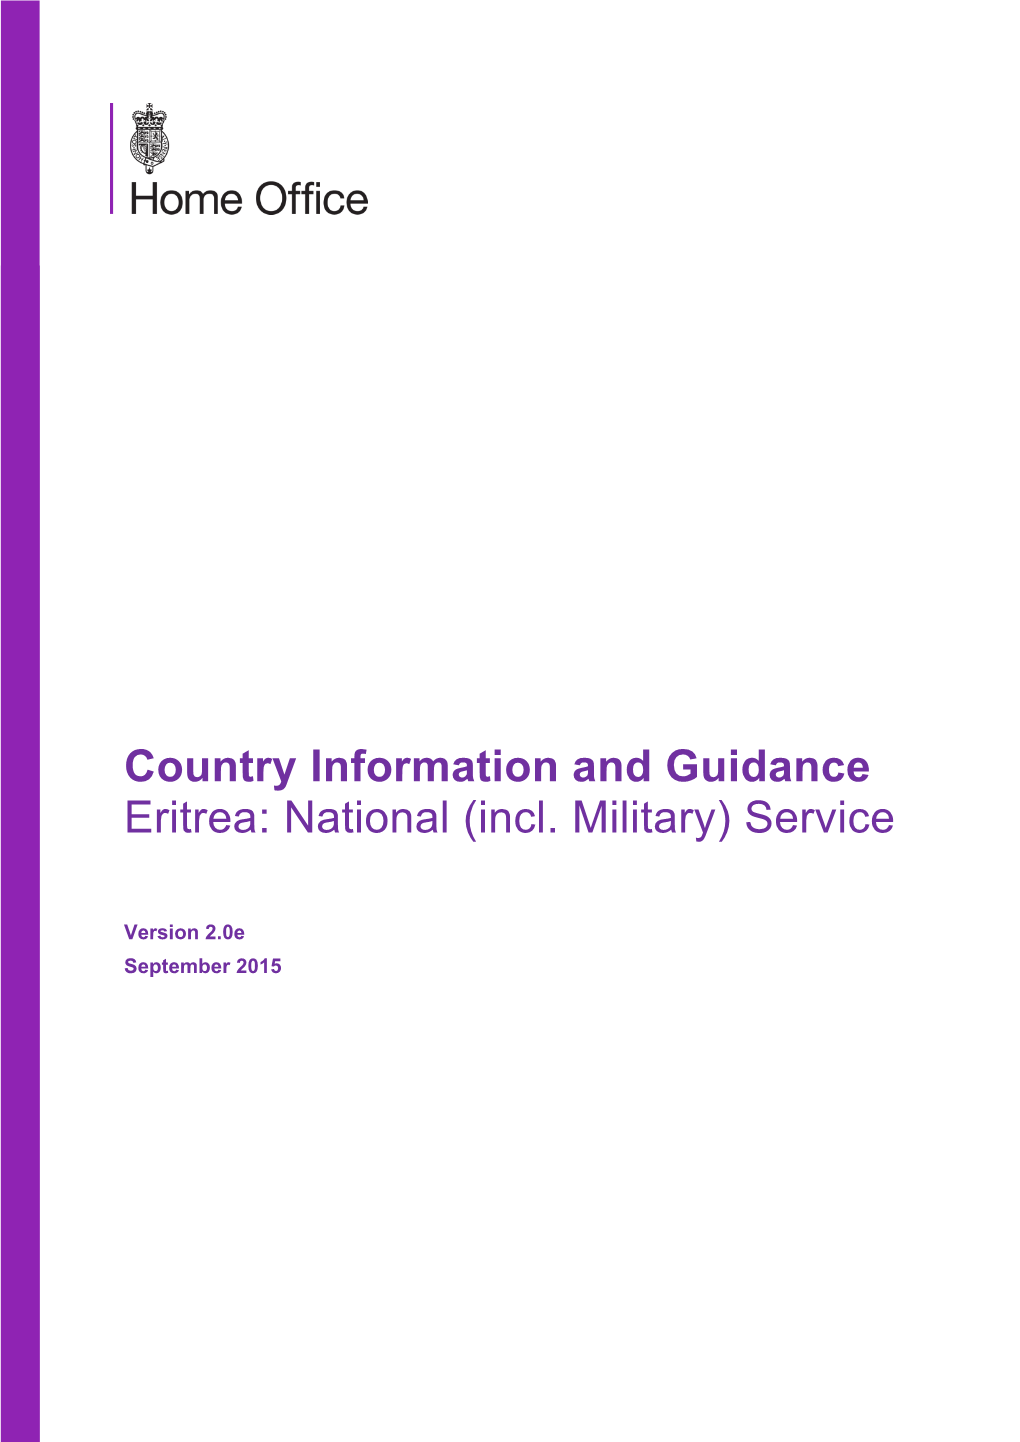 Country Information and Guidance Eritrea: National (Incl. Military) Service